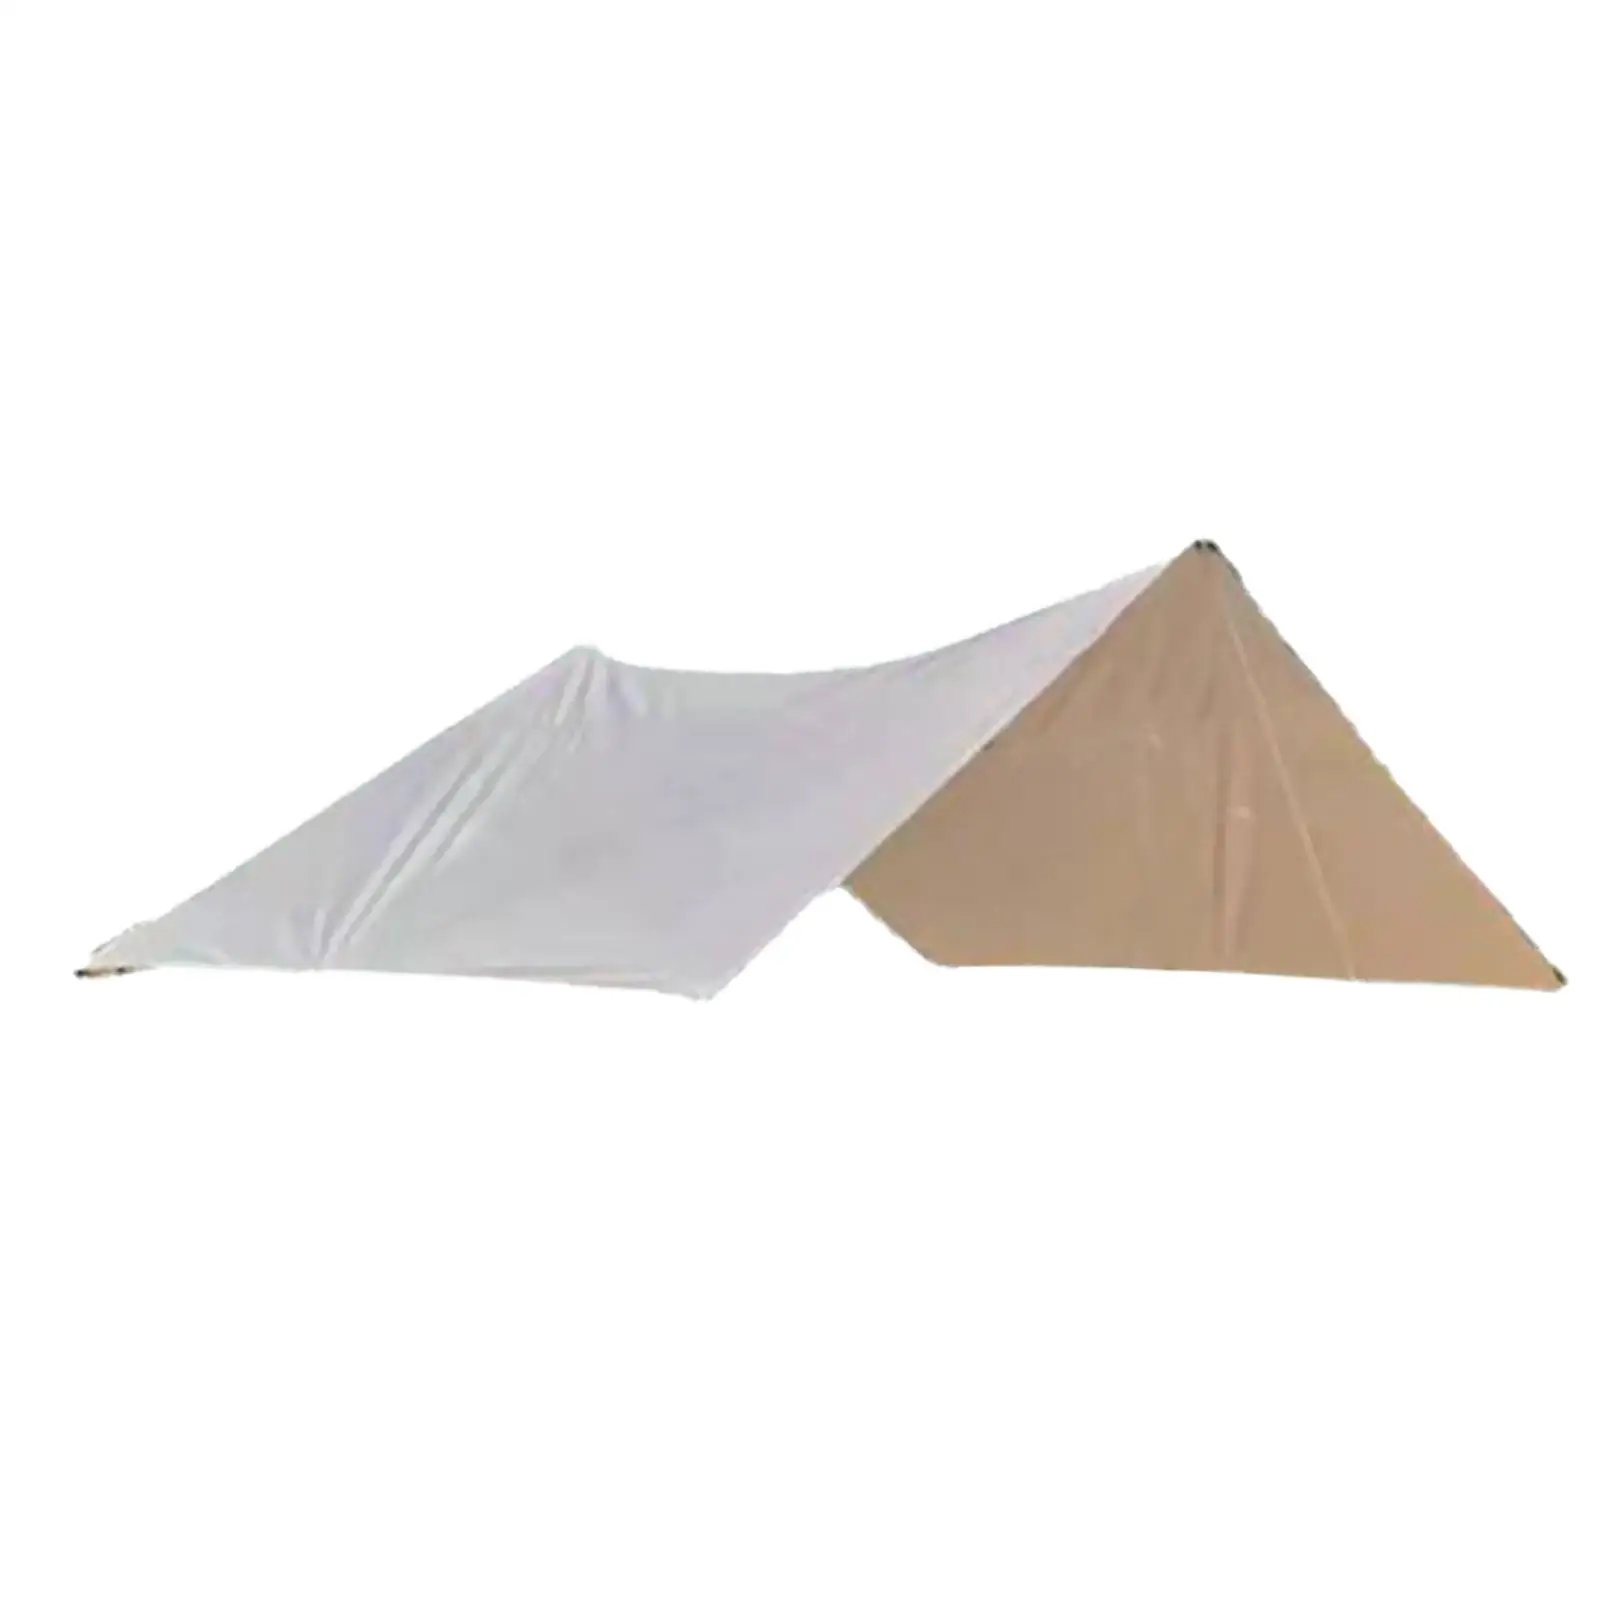 Portable Camping Tent Tarp Sun Shelter Awning Rainproof Sun Protection Waterproof for Hiking Picnic Outdoor Travel